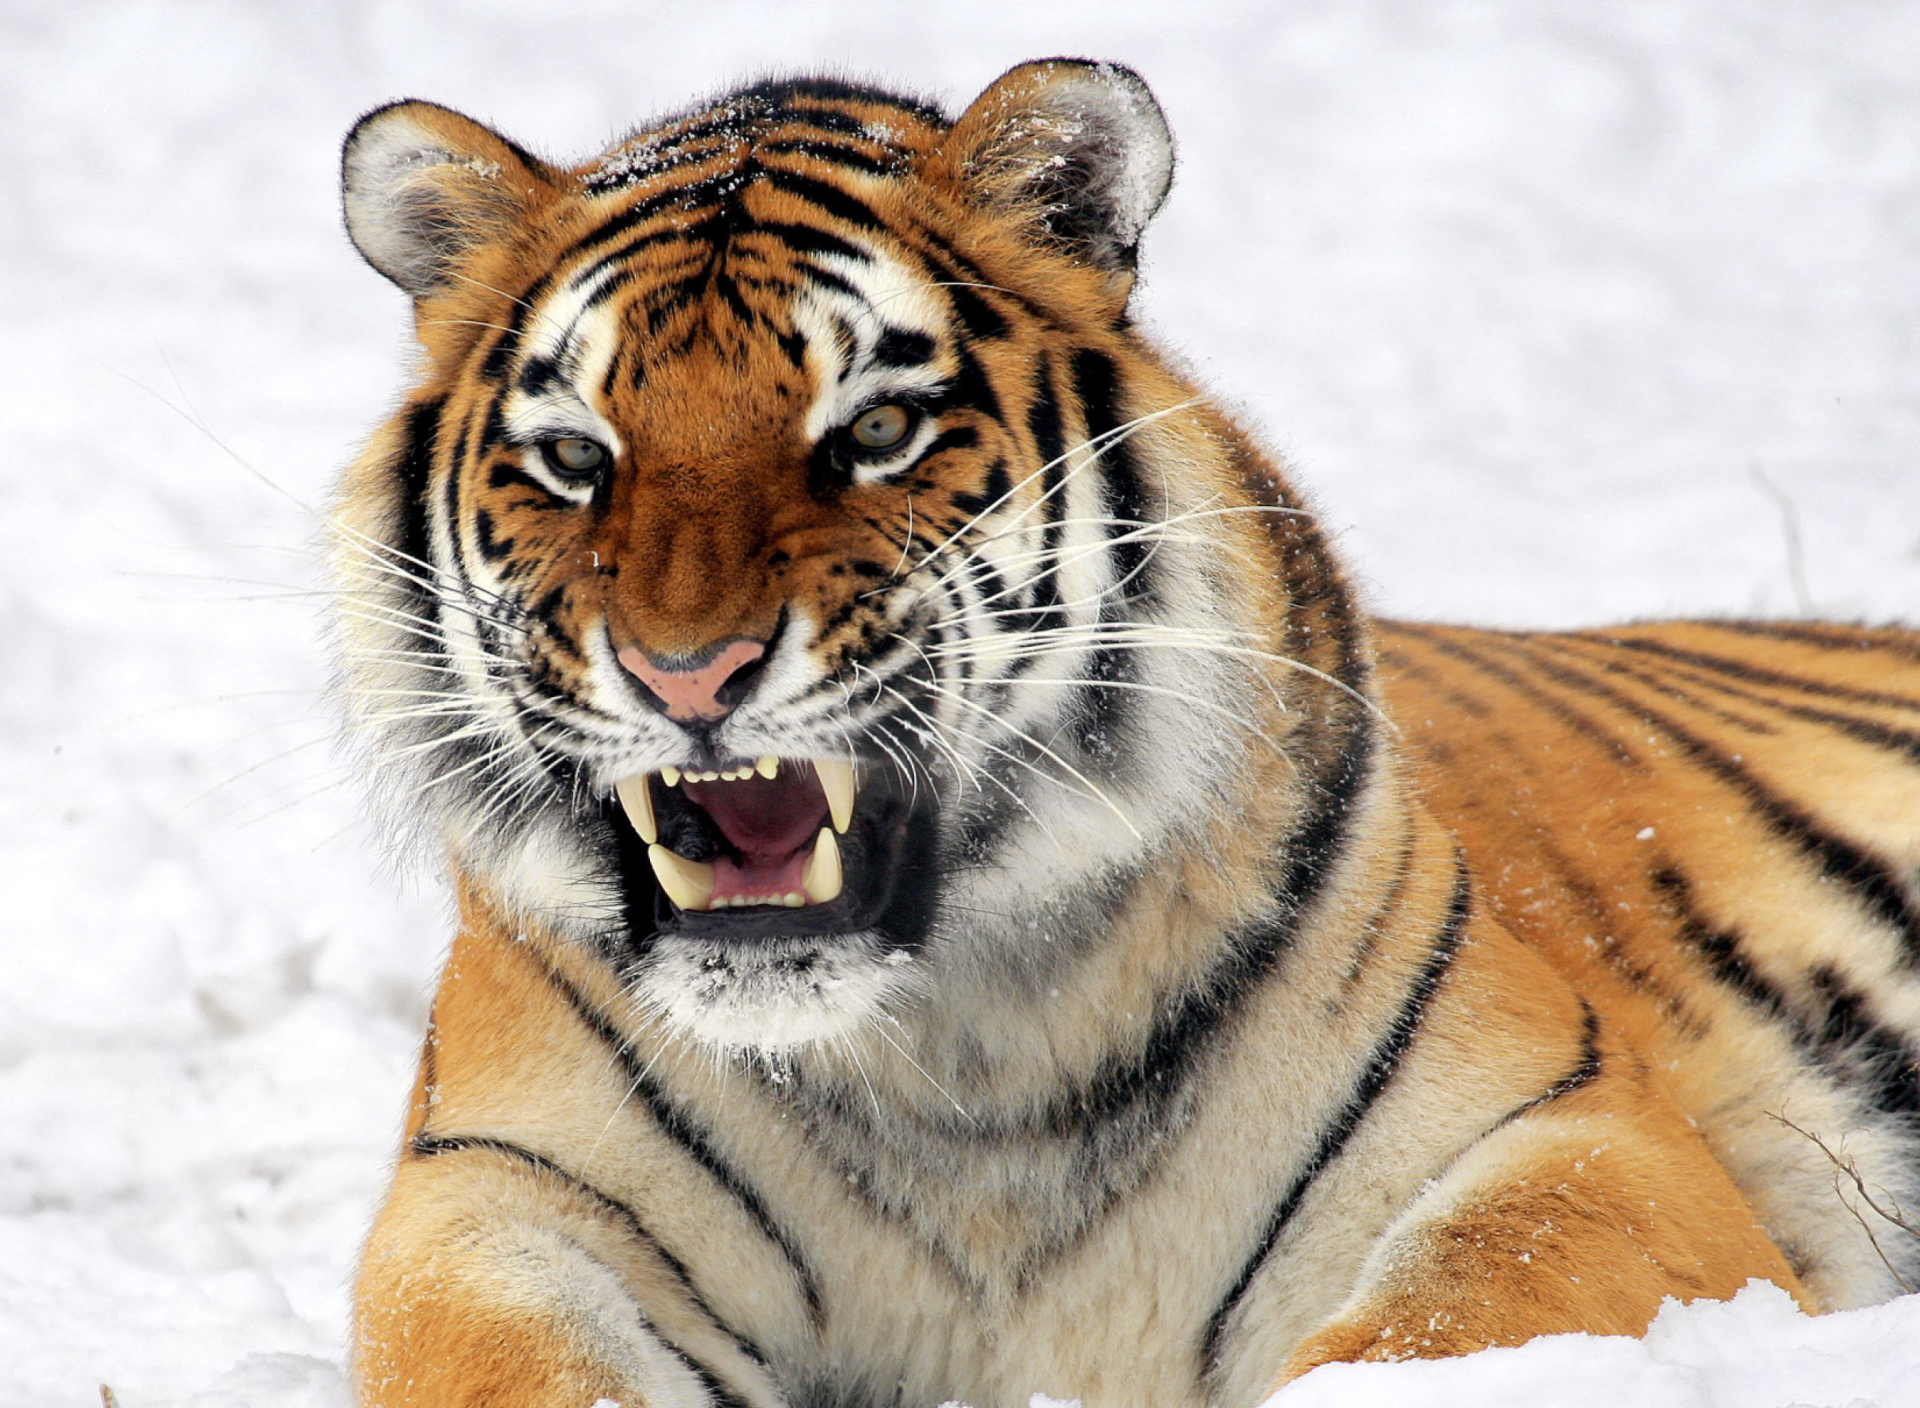 Tiger In The Snow wallpaper 1920x1408